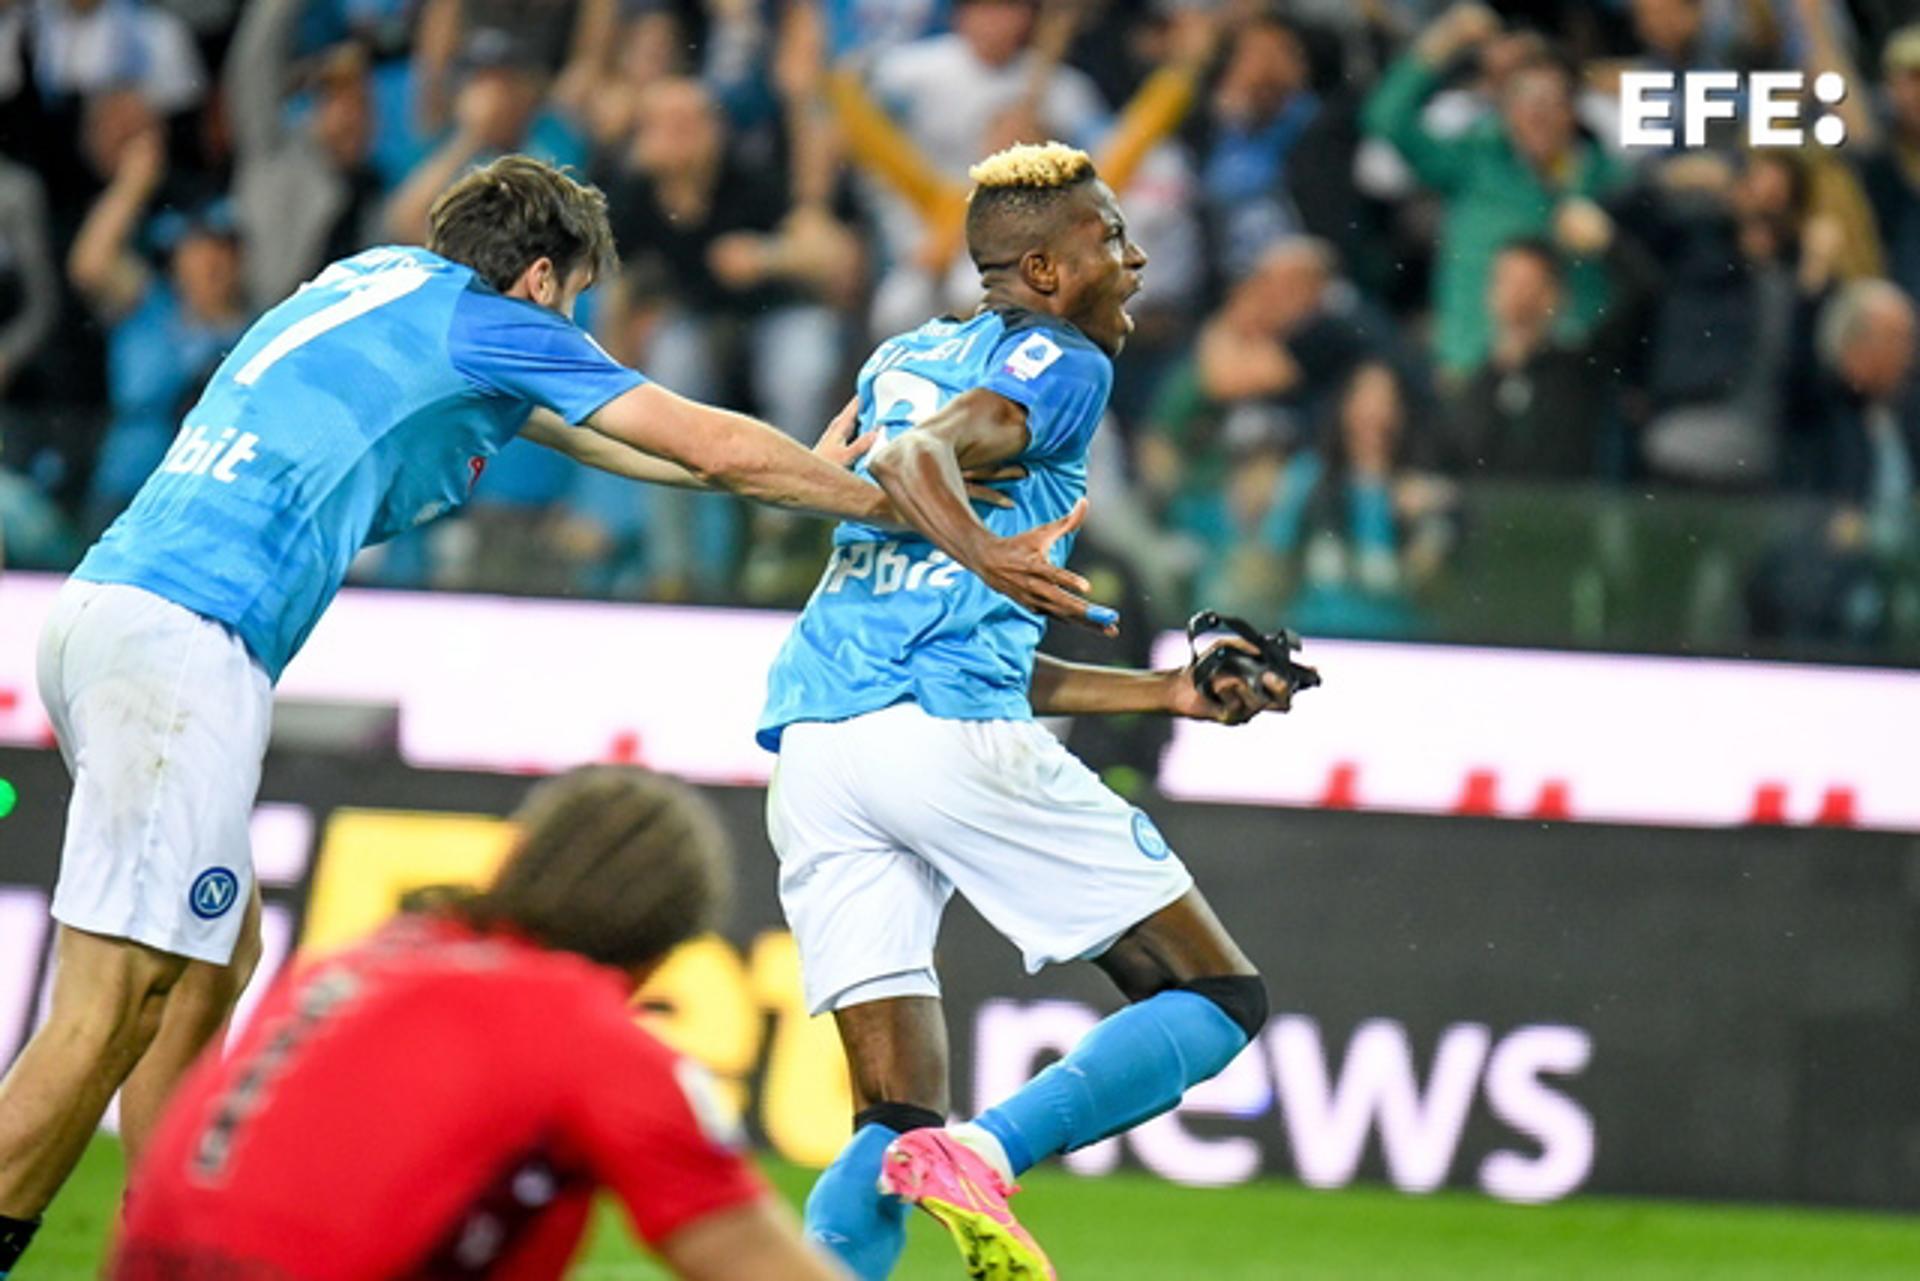 Napoli's Victor Osimhen (R) celebrates after scoring against Udinese during a Serie A match at Dacia Arena in Udine, Italy, on 4 May 2023. EFE/EPA/ETTORE GRIFFONI